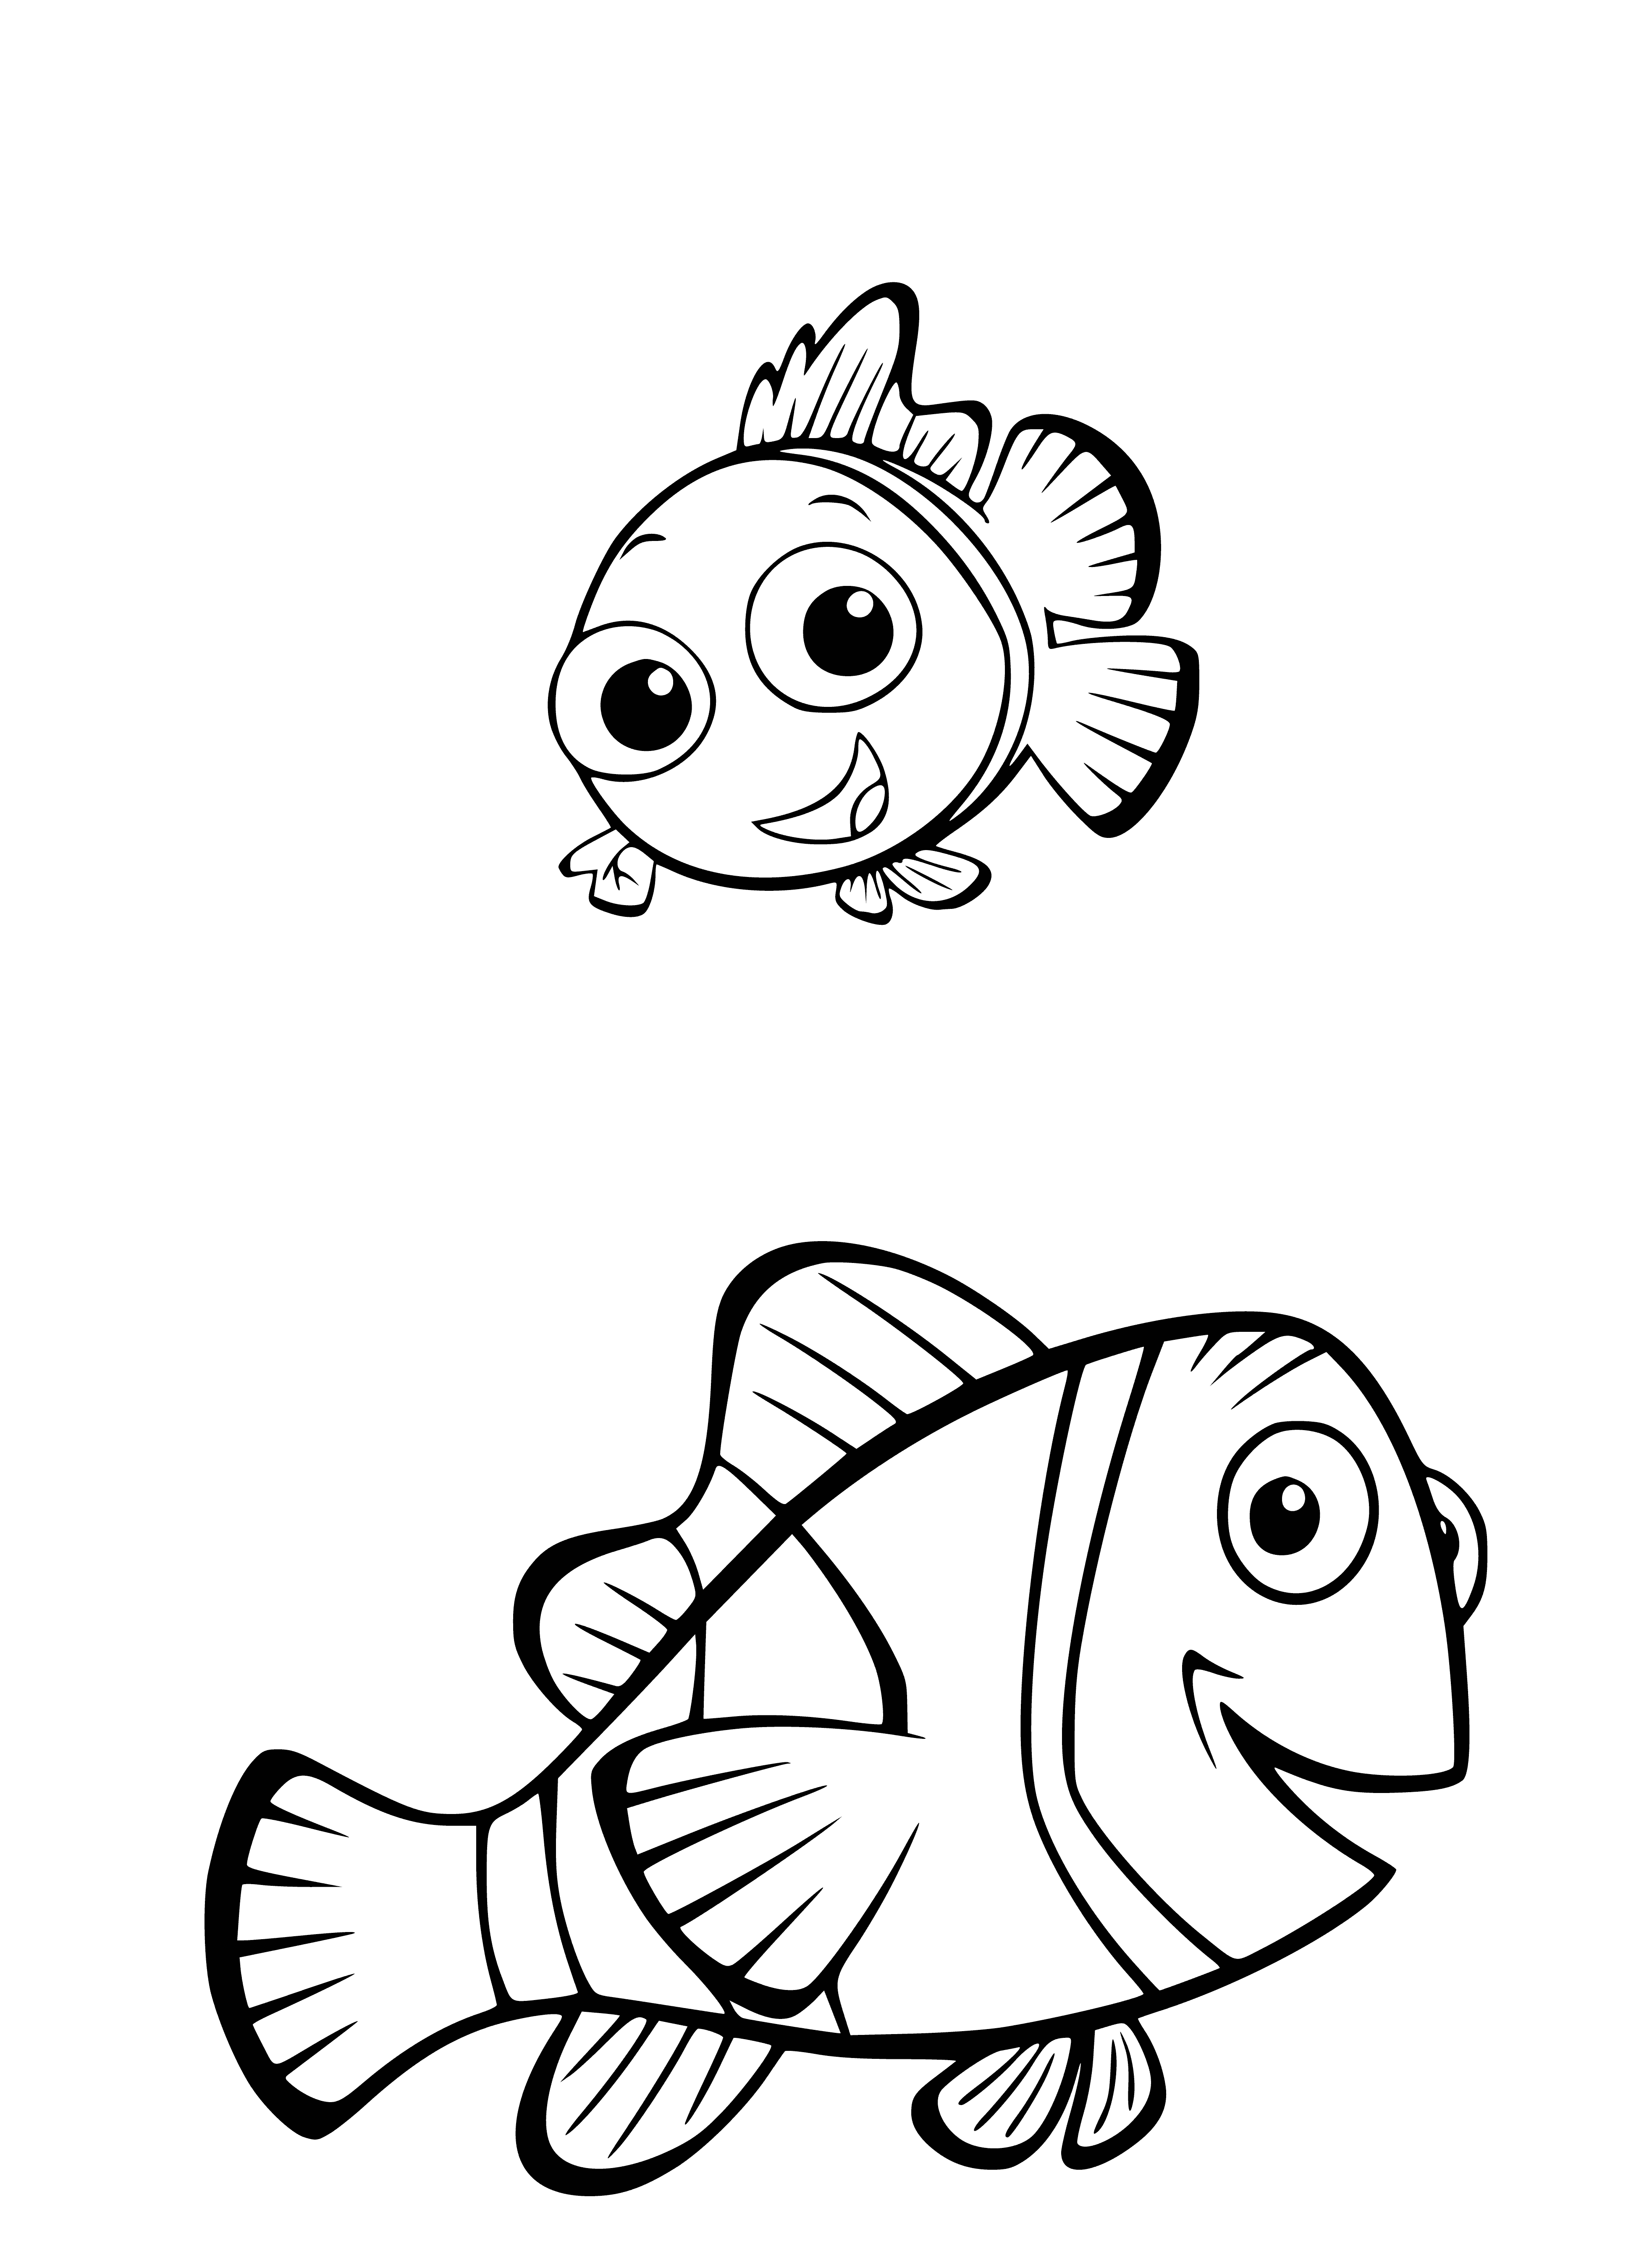 coloring page: The Pope and Nemo smile and look at each other while Nemo holds a goldfish bowl and the Pope holds a staff, both wearing robes.